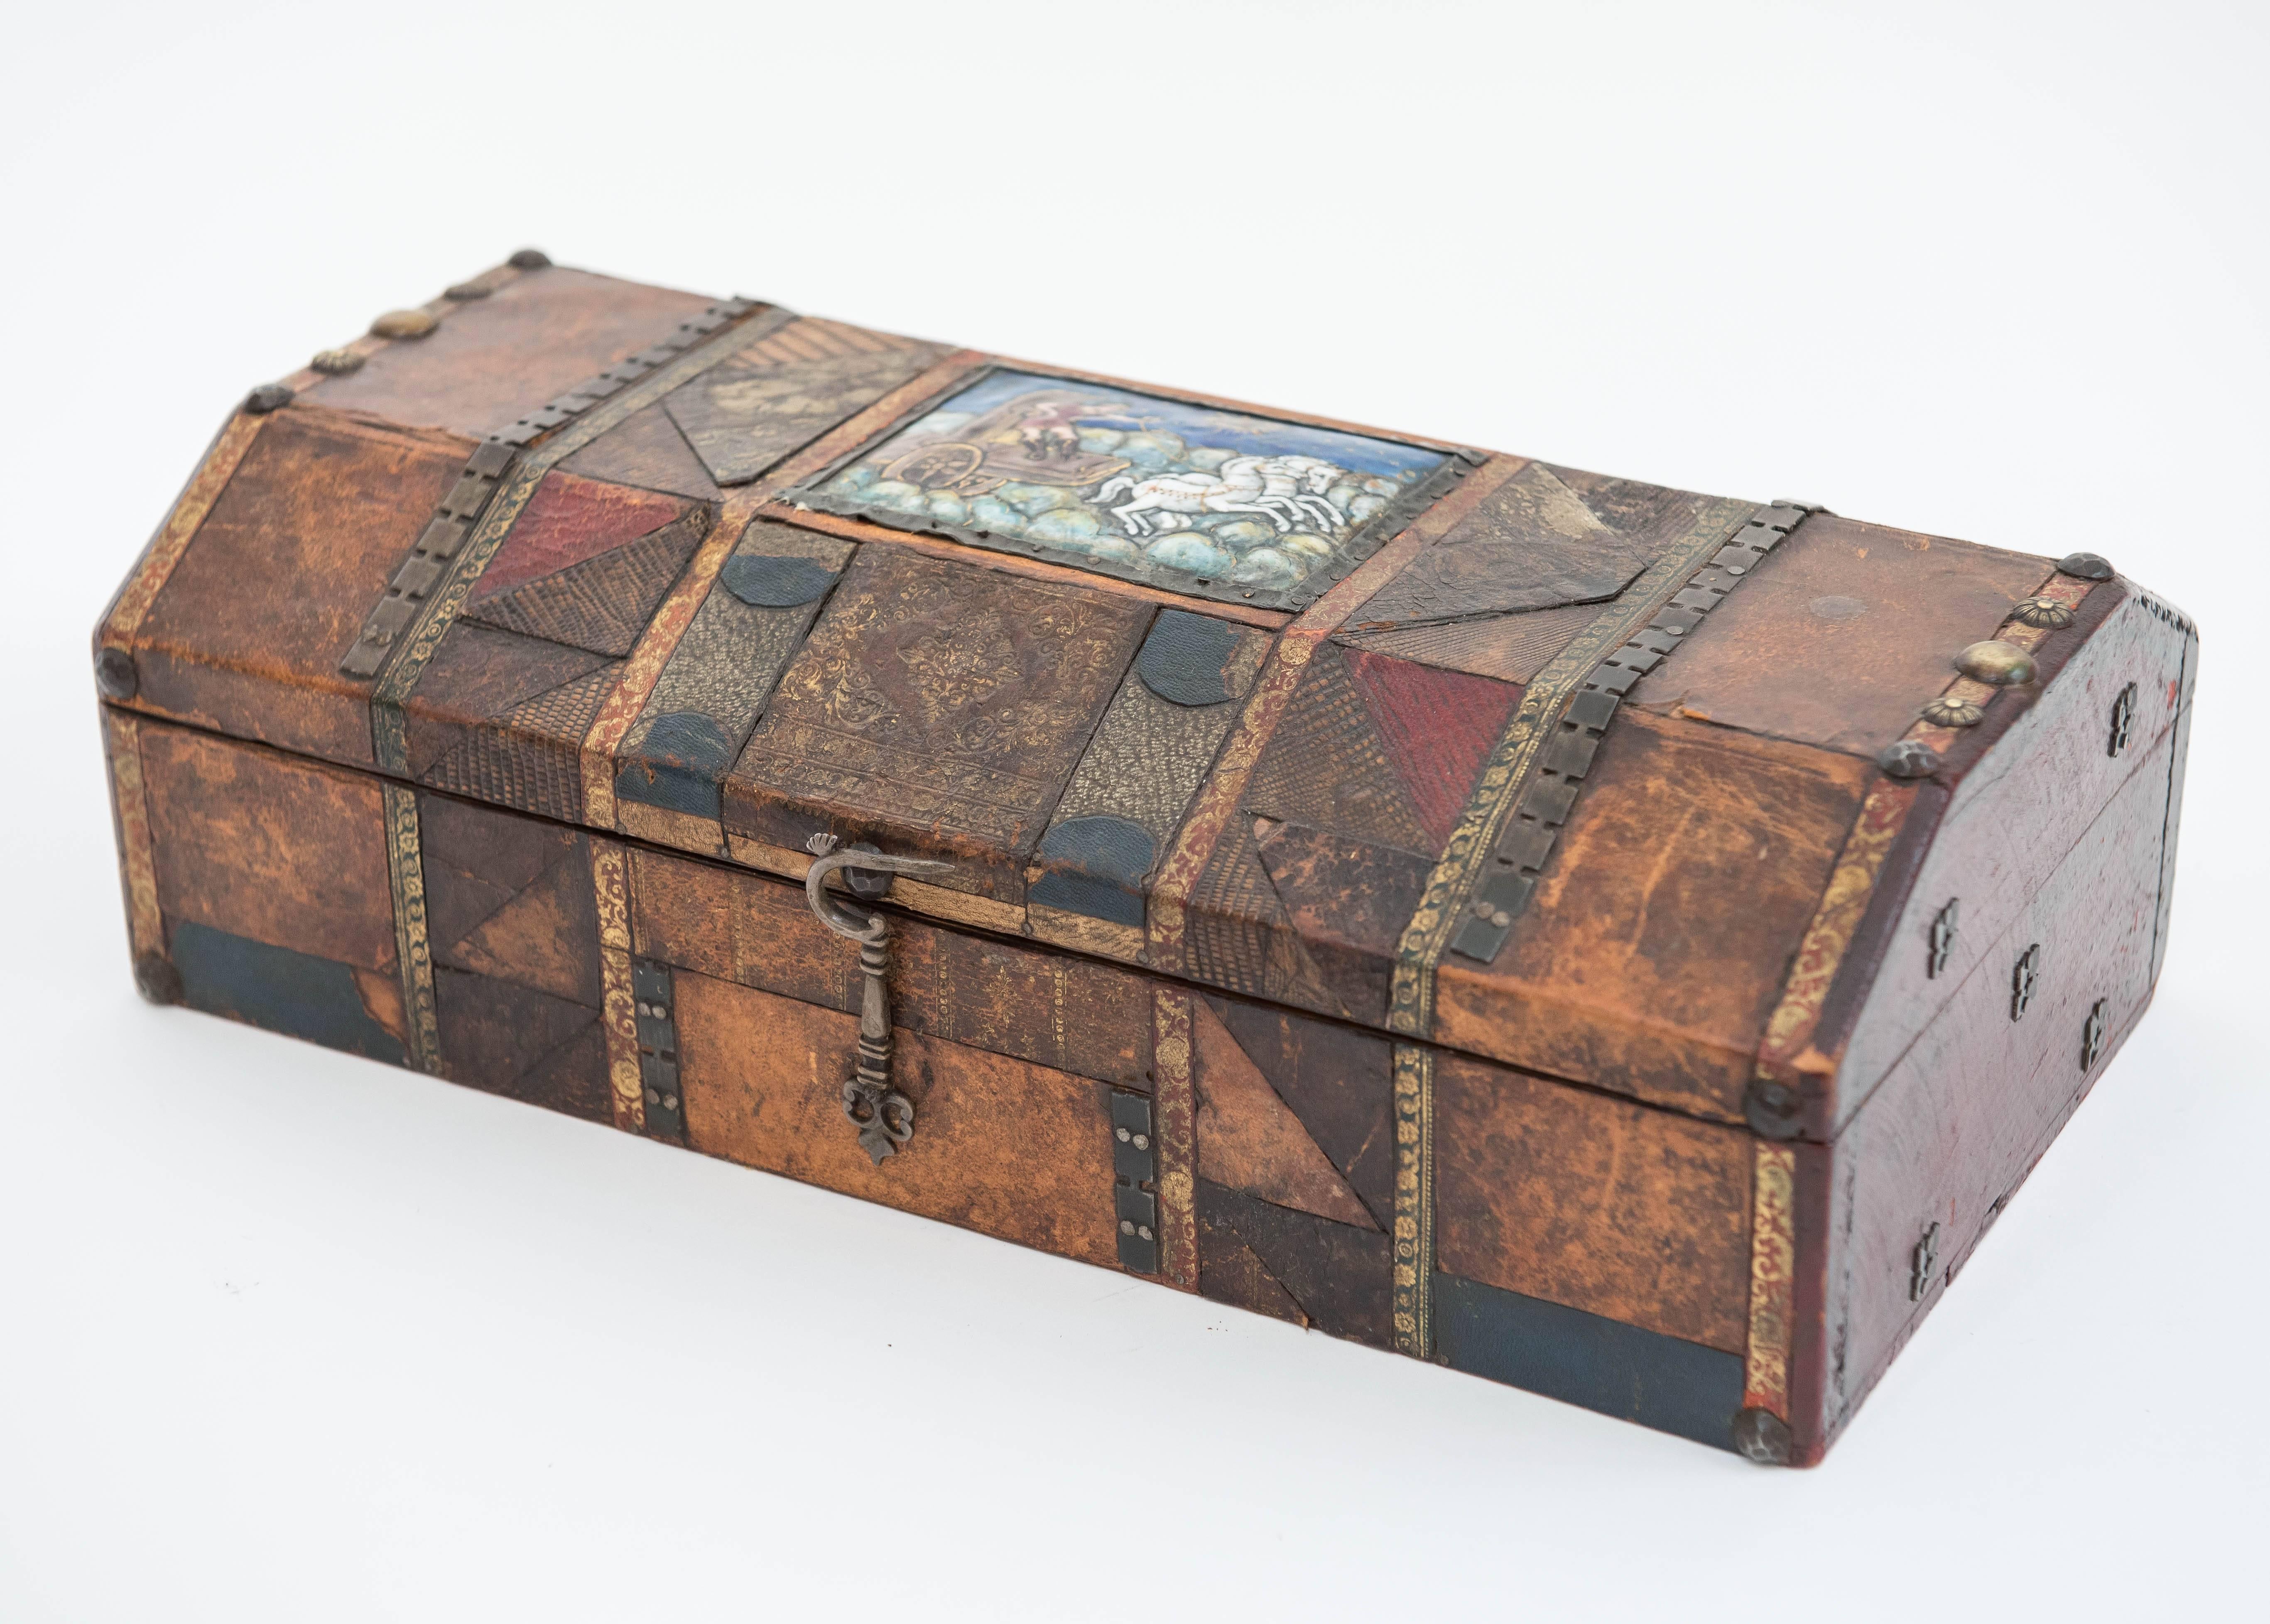 A most unique patchwork leather covered wood box with highly decorative
plaque, nailhead studs and other assorted ornamentation. The inside is 
beautifully lined with antique paper.